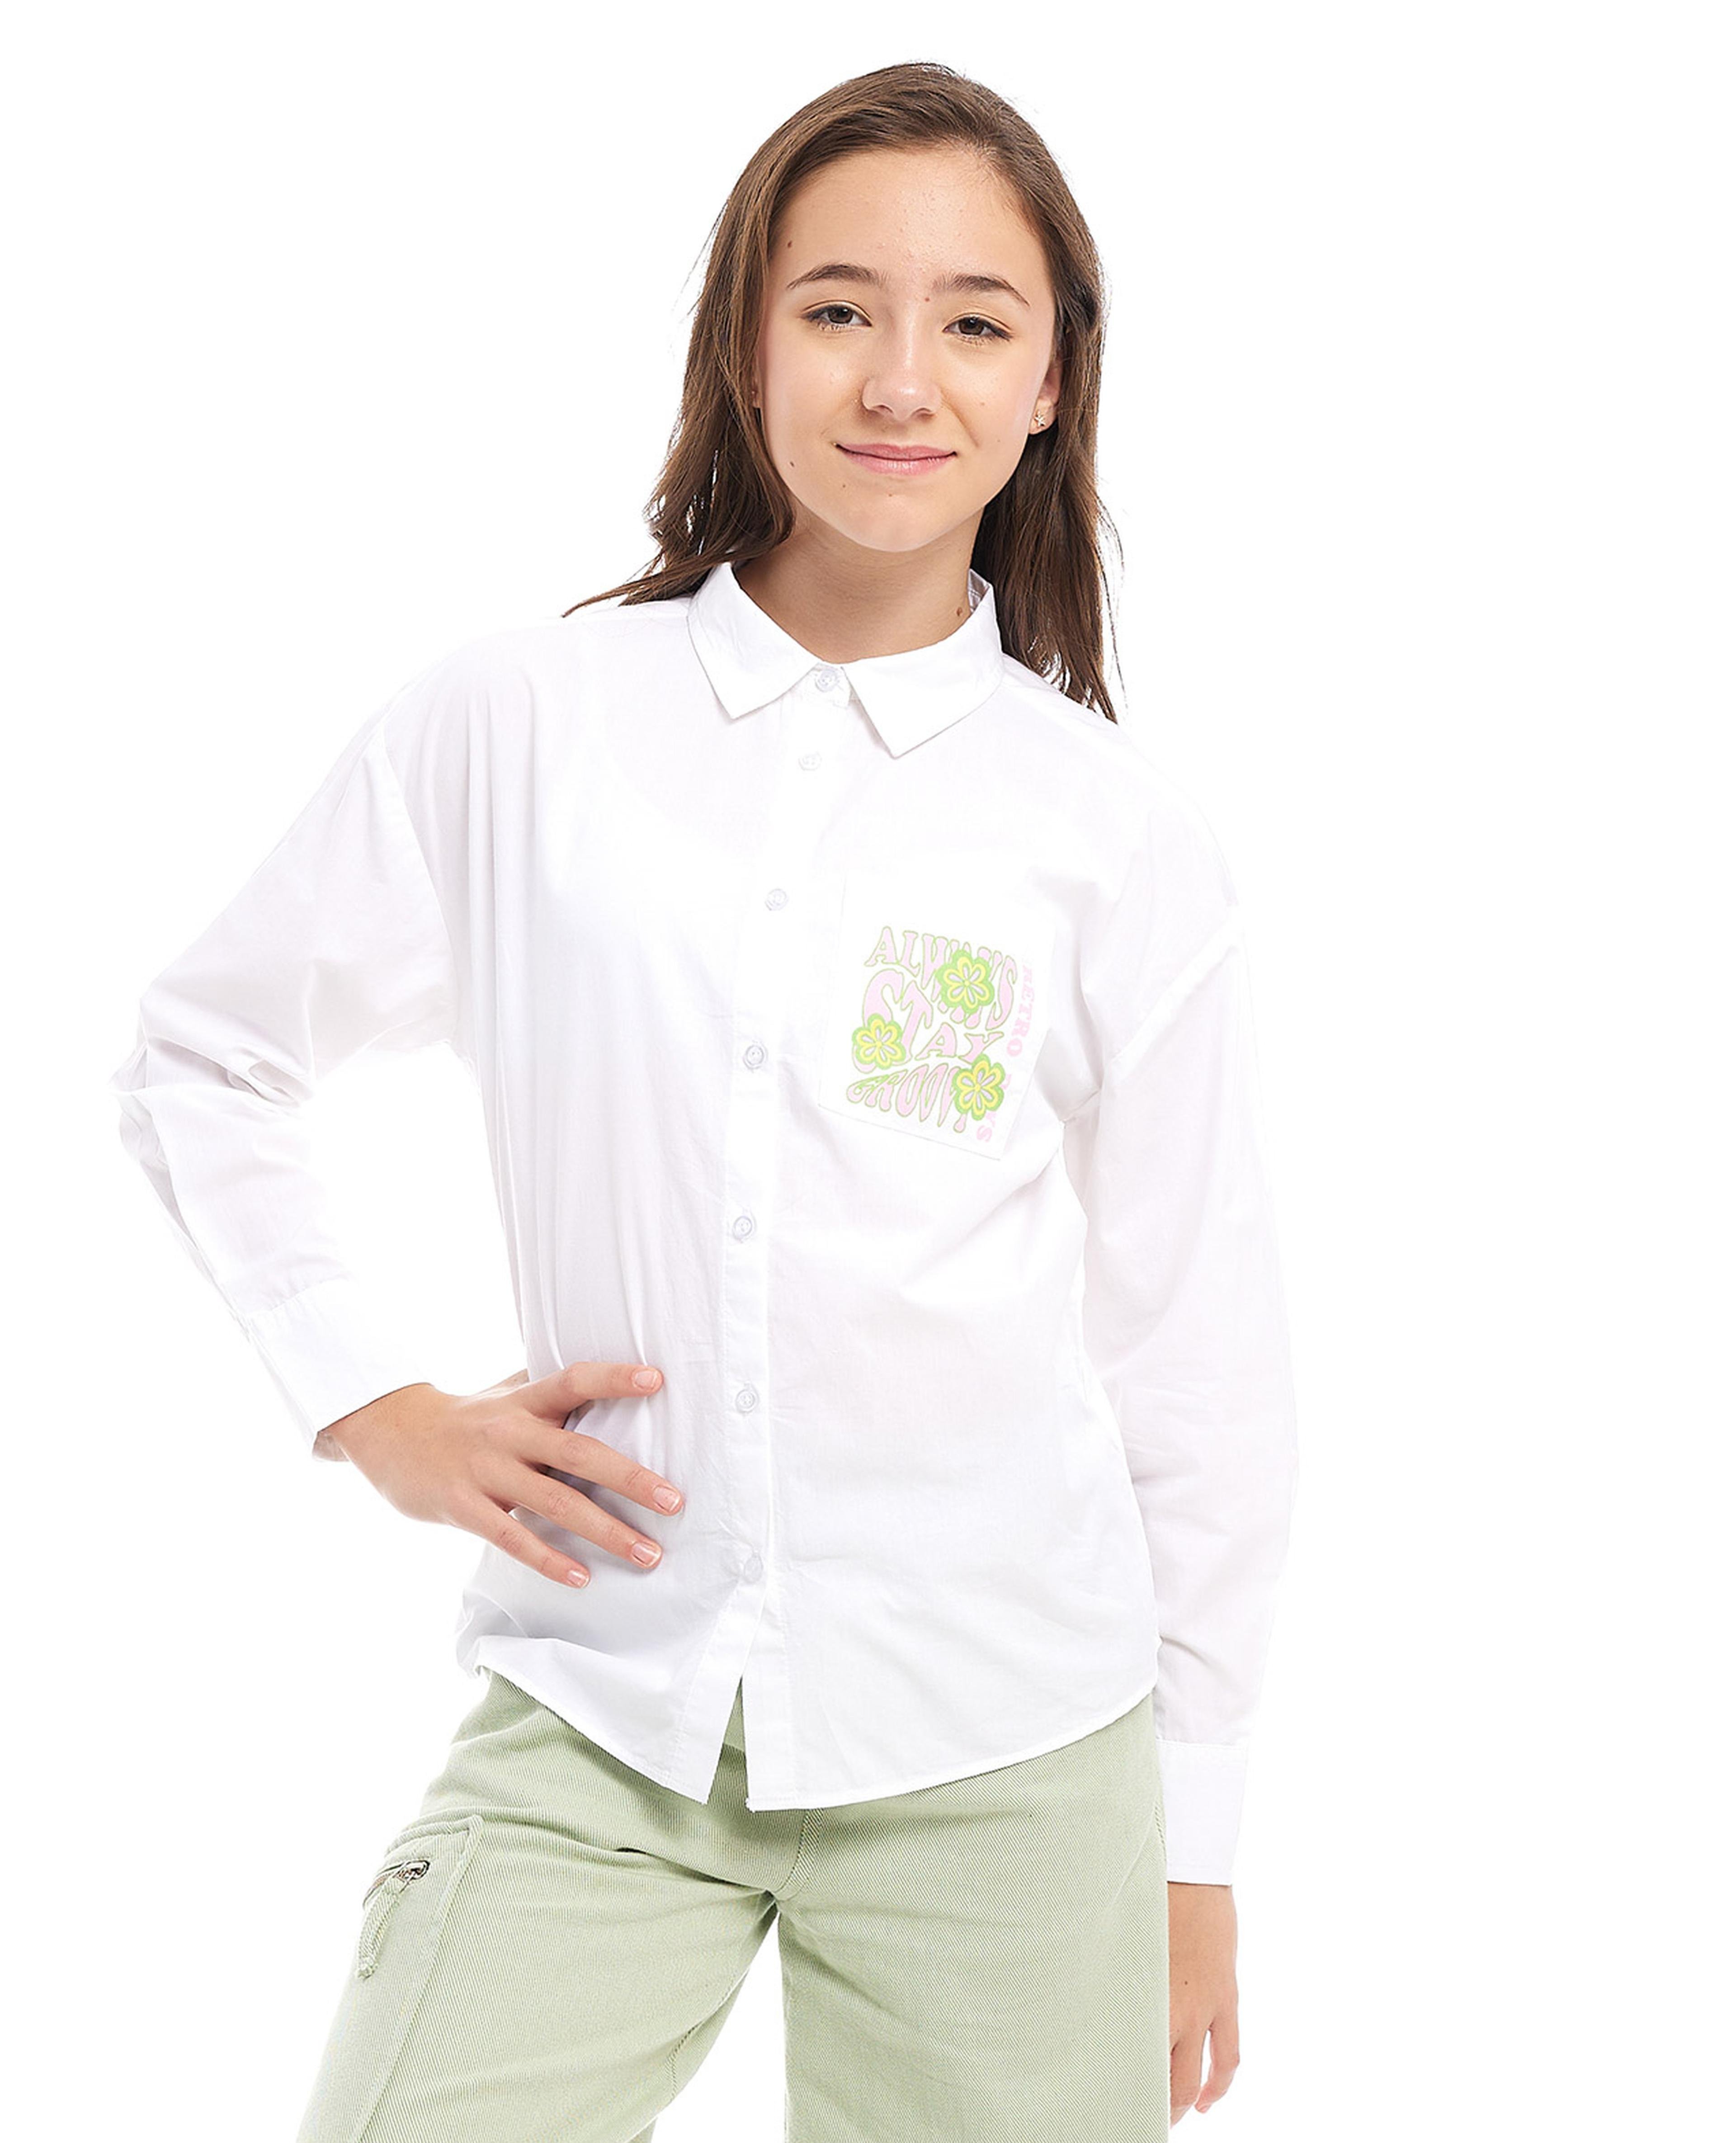 Back Printed Shirt with Classic Collar and Long Sleeves